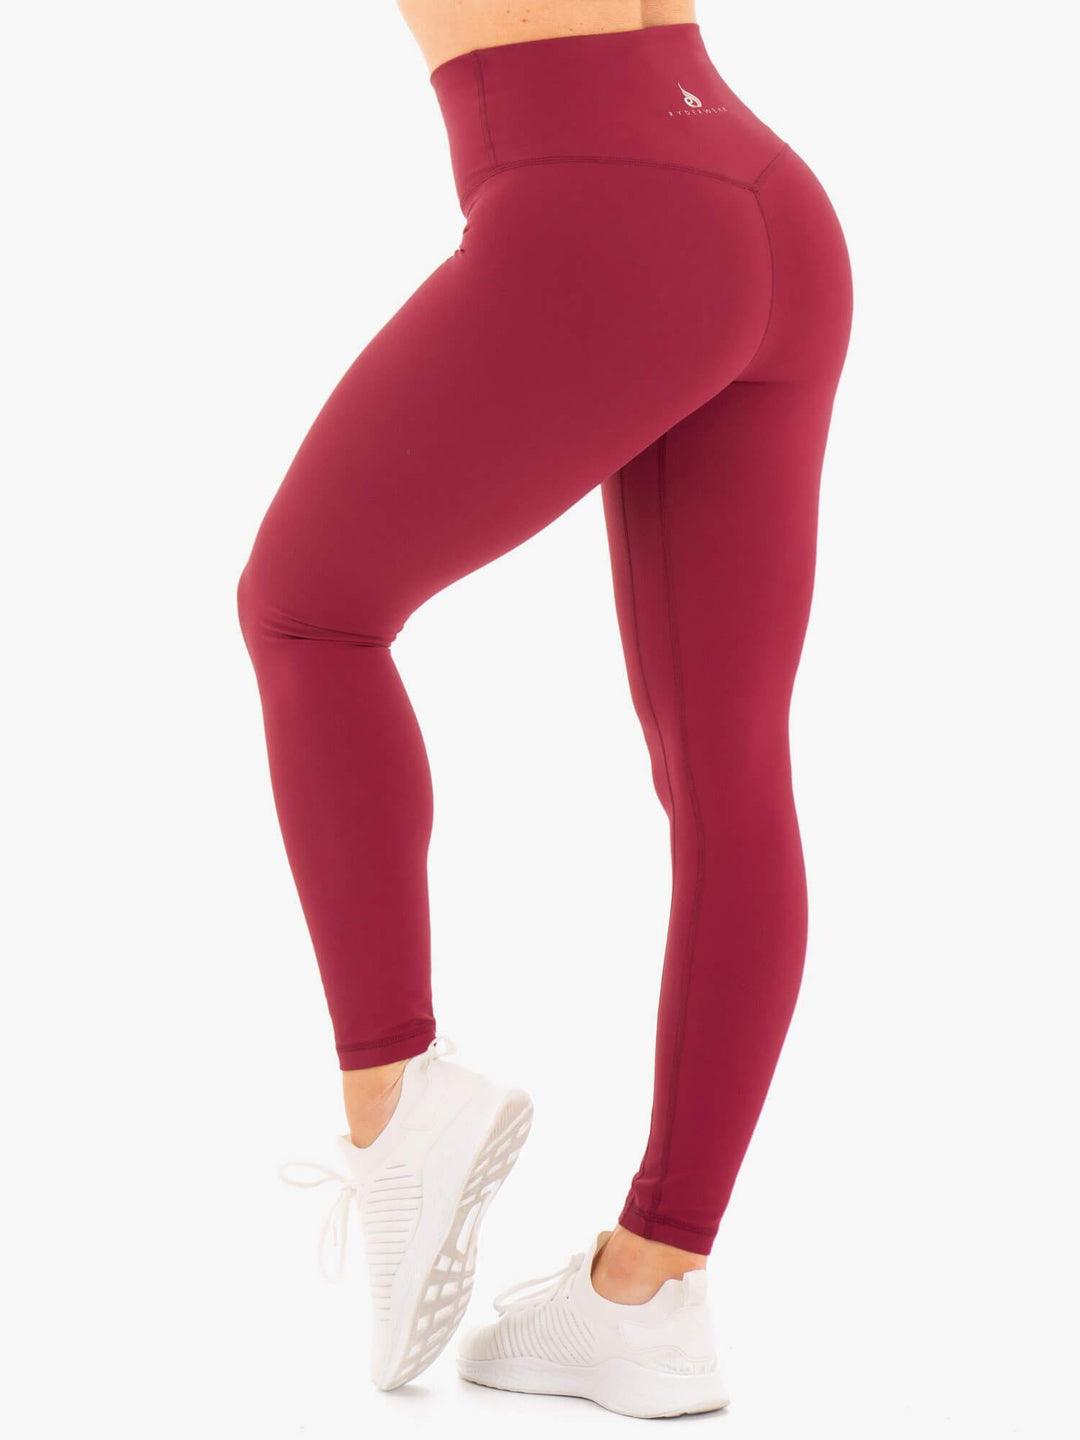 NKD High Waisted Leggings - Berry Red Clothing Ryderwear 